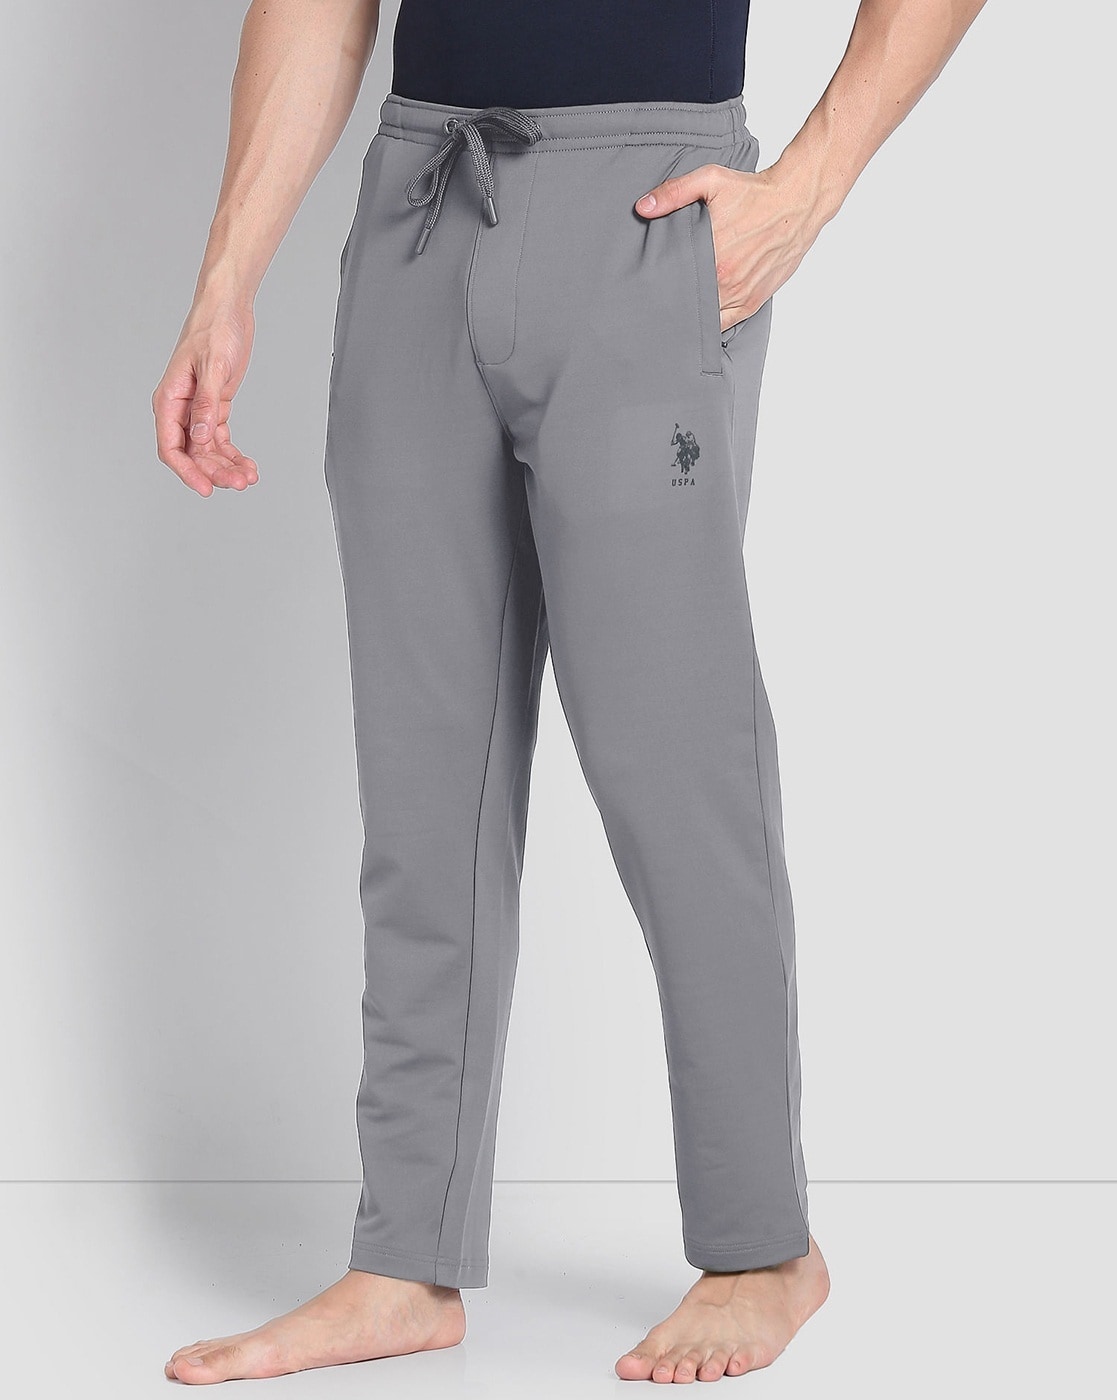 US Polo Men's Comfort Fit Heathered Track Pants